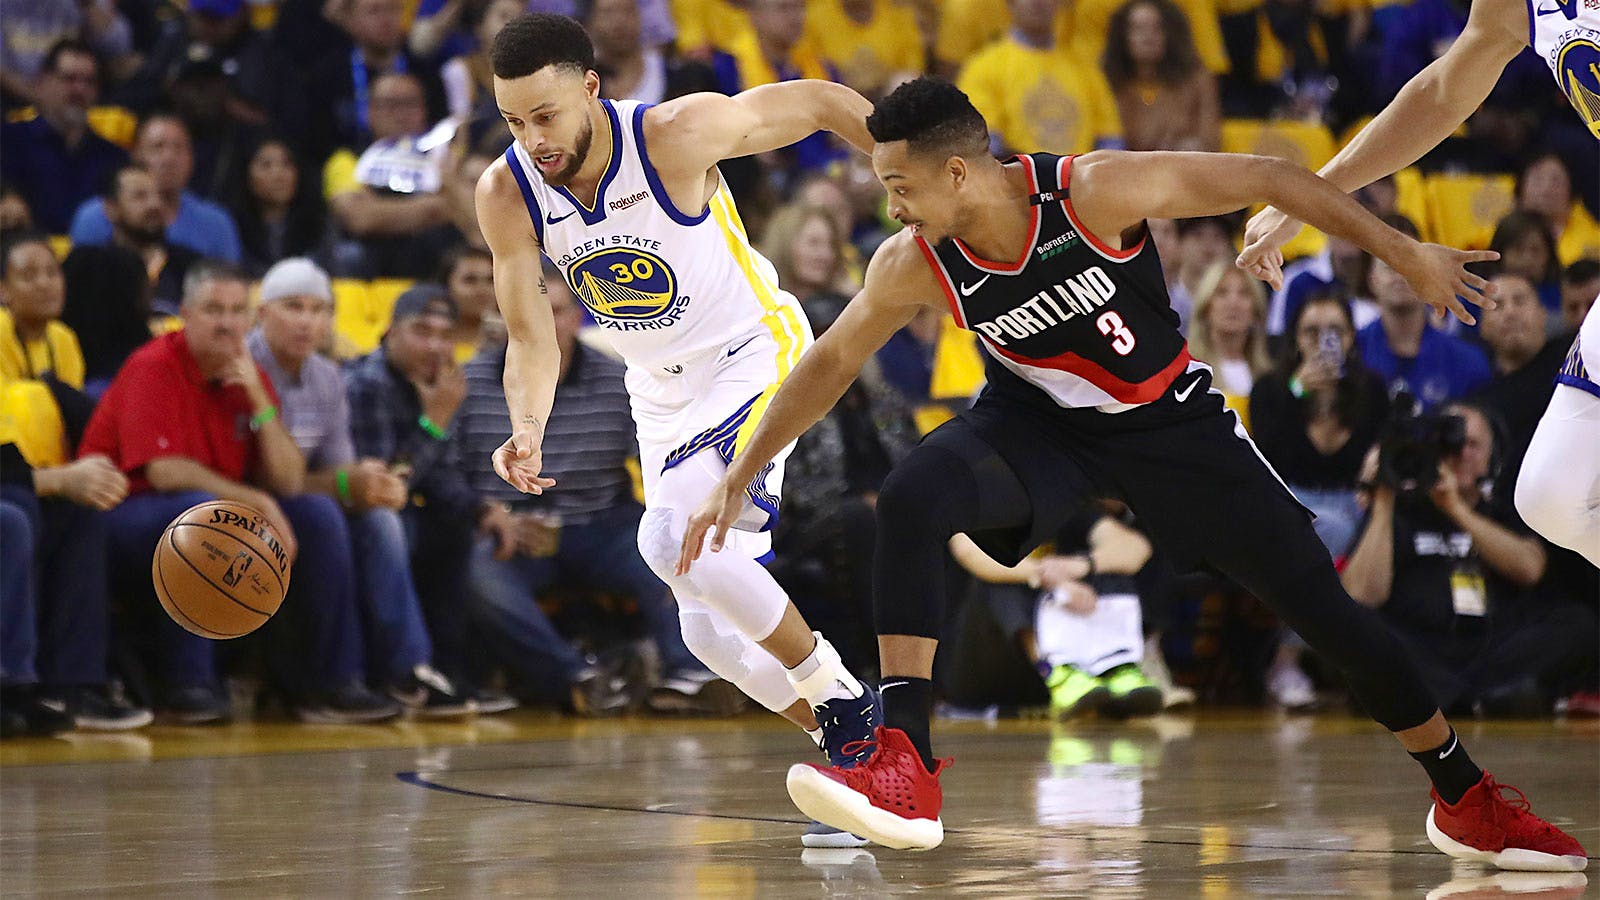 Sonoma vs. Willamette Winemakers Bet a Ton (of Grapes) on Warriors-Blazers in Pinot Throwdown